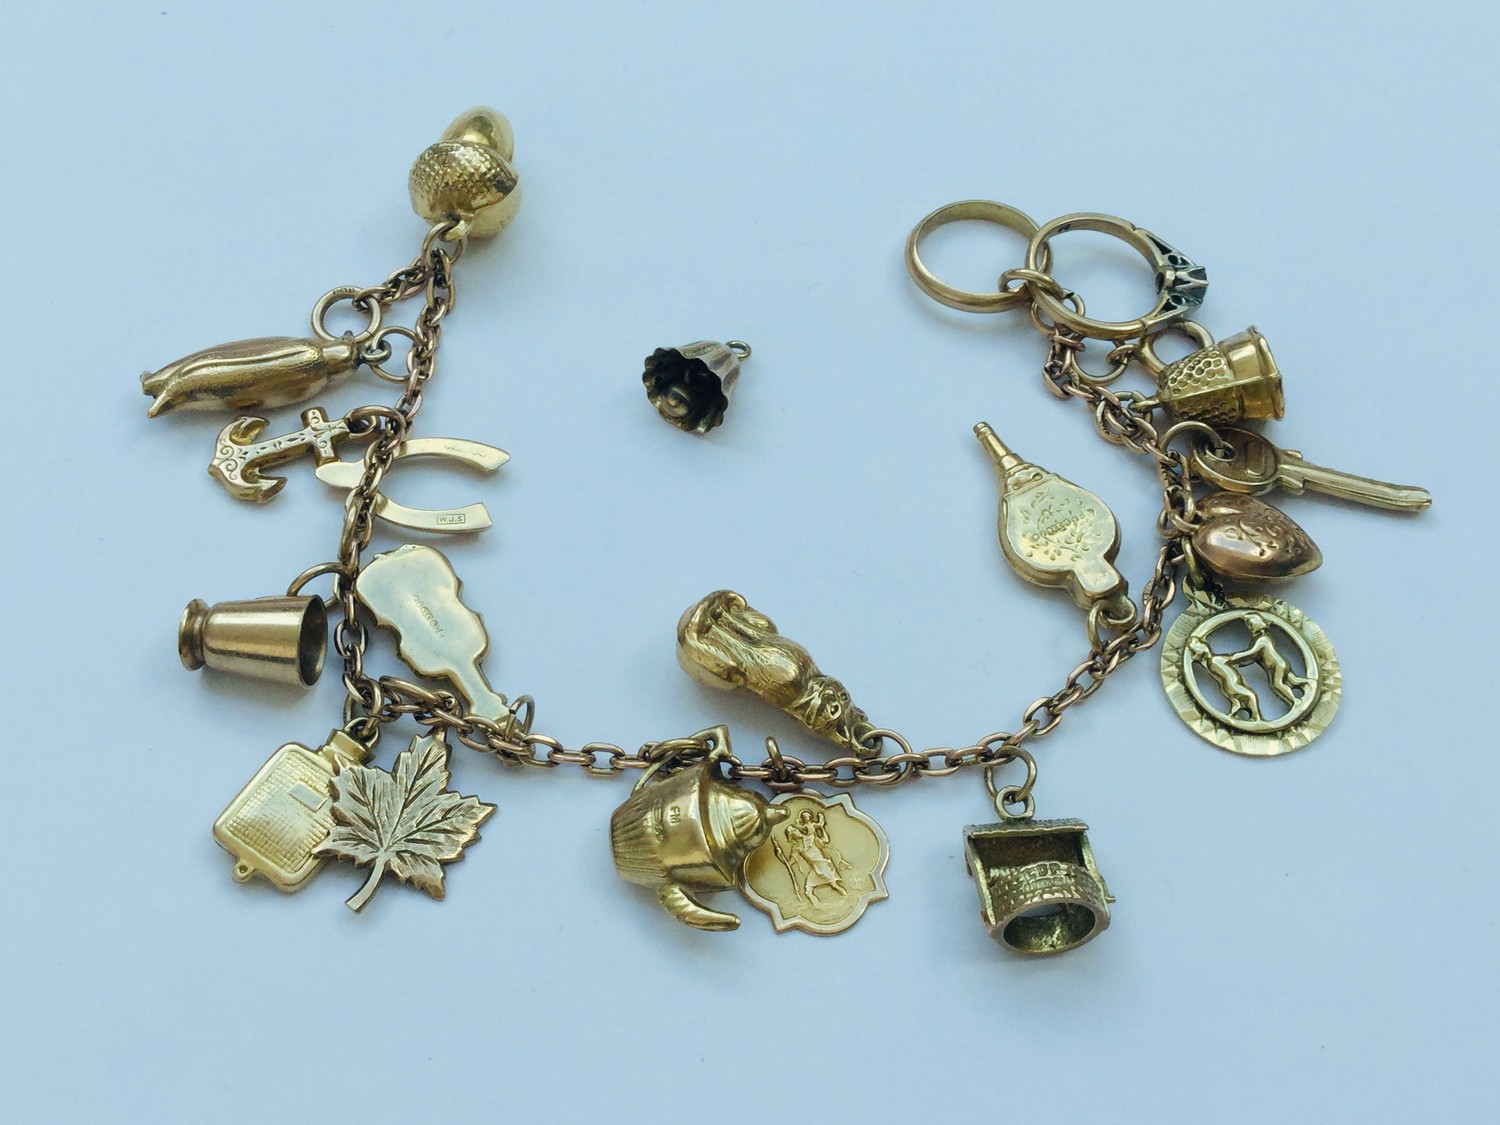 A 9ct gold charm bracelet with 19 x gold charms (one charm loose) including a penguin, an acorn, a